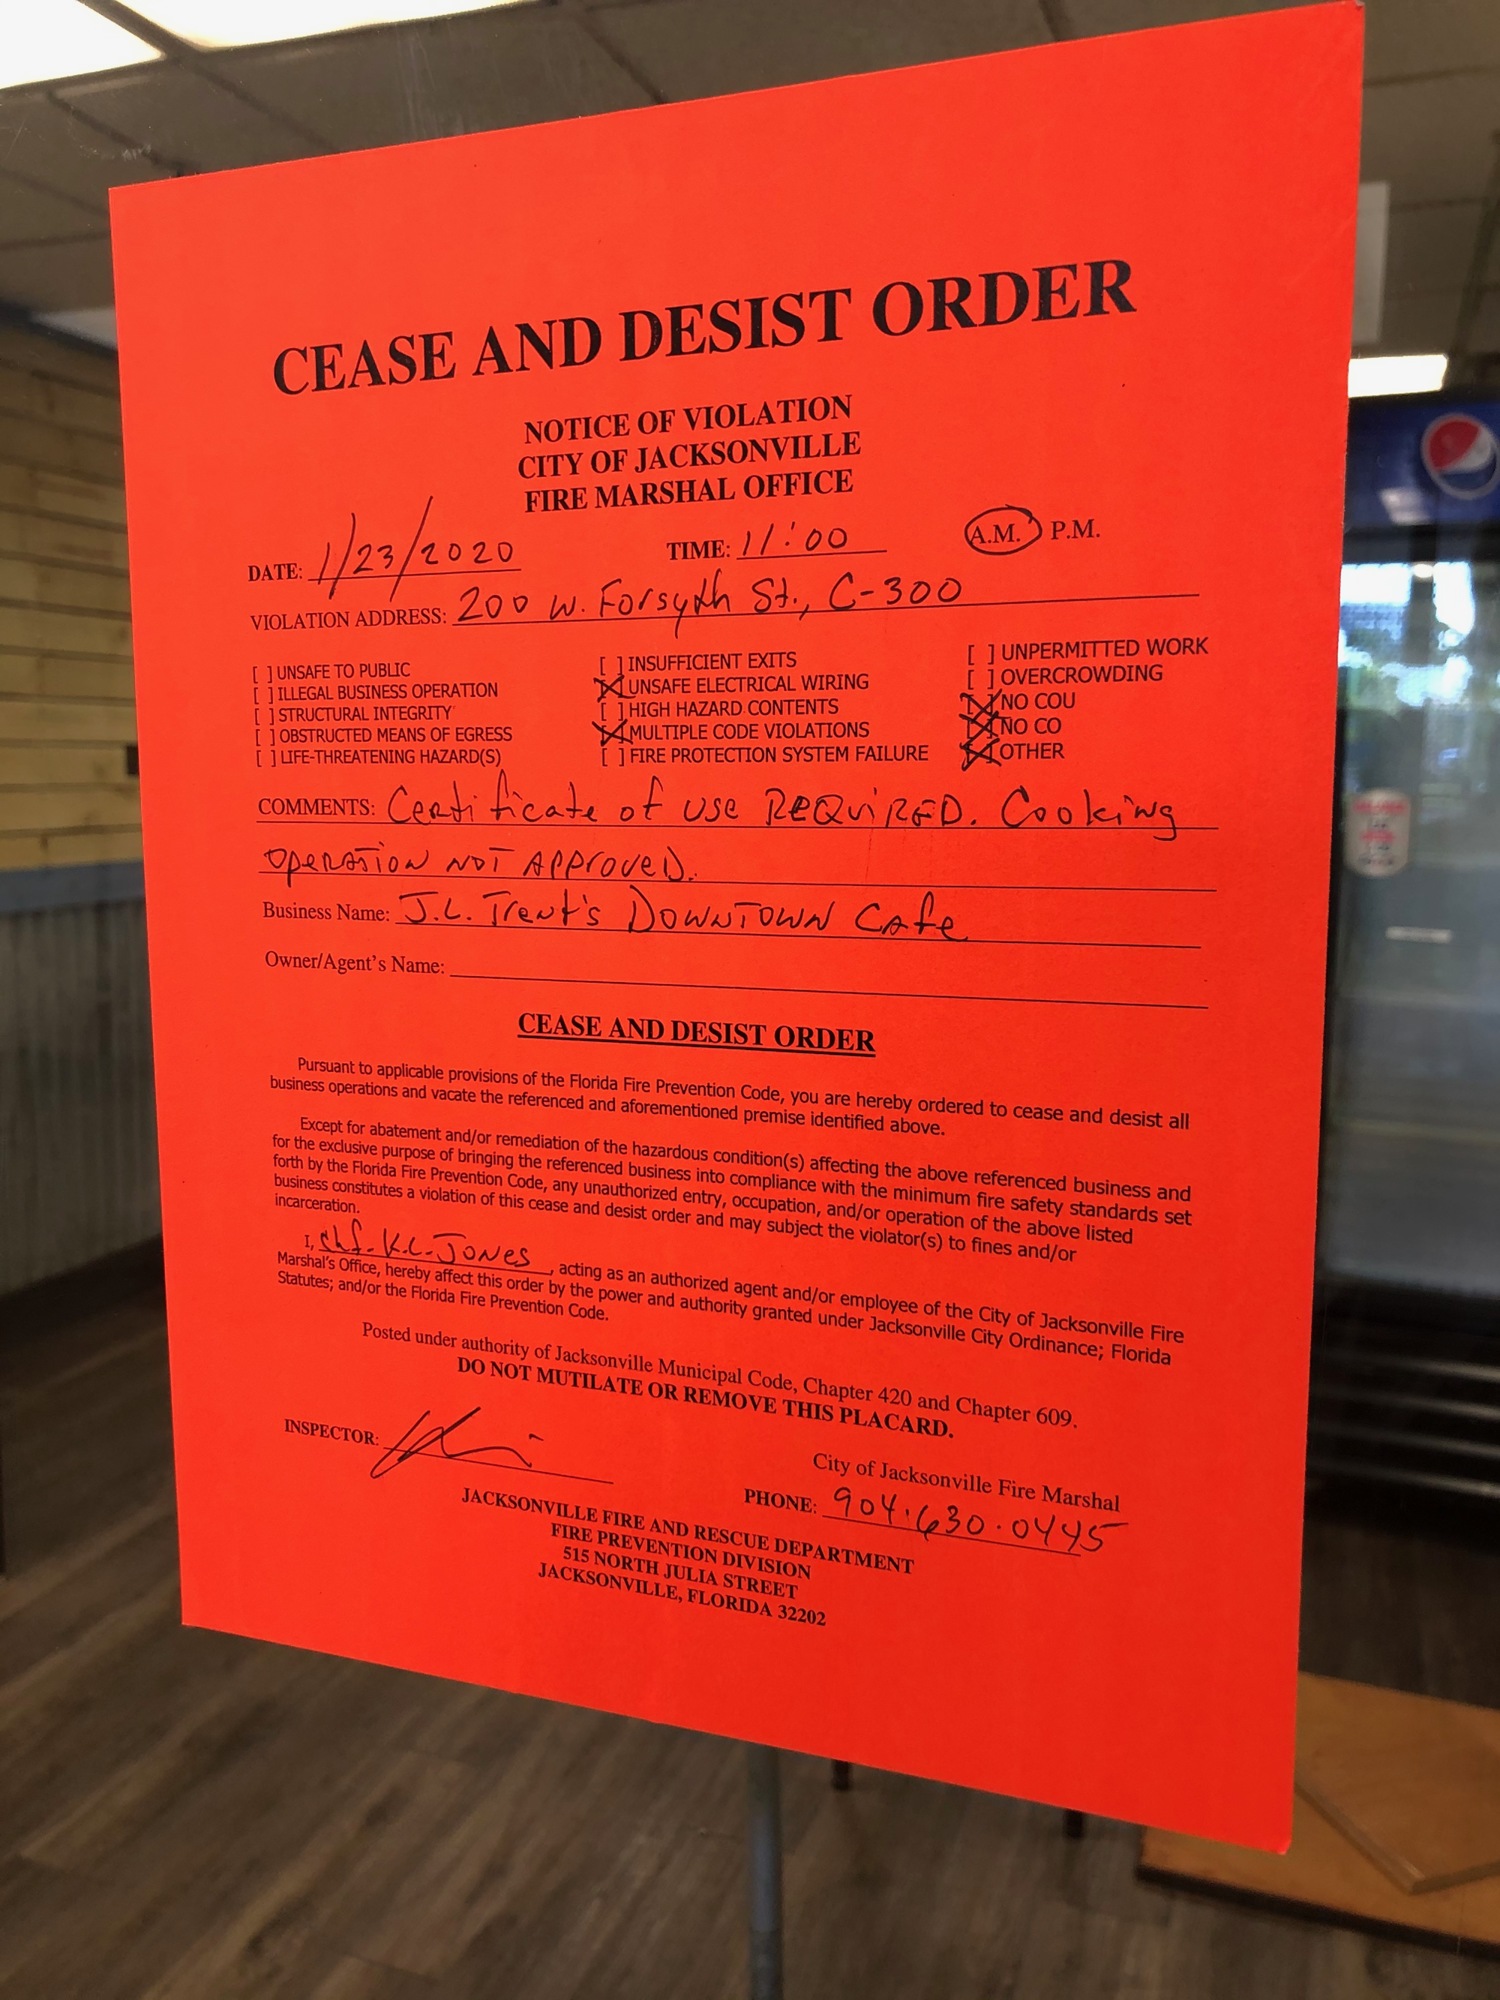 A cease-and-desist order posted on the window of the restaurant.